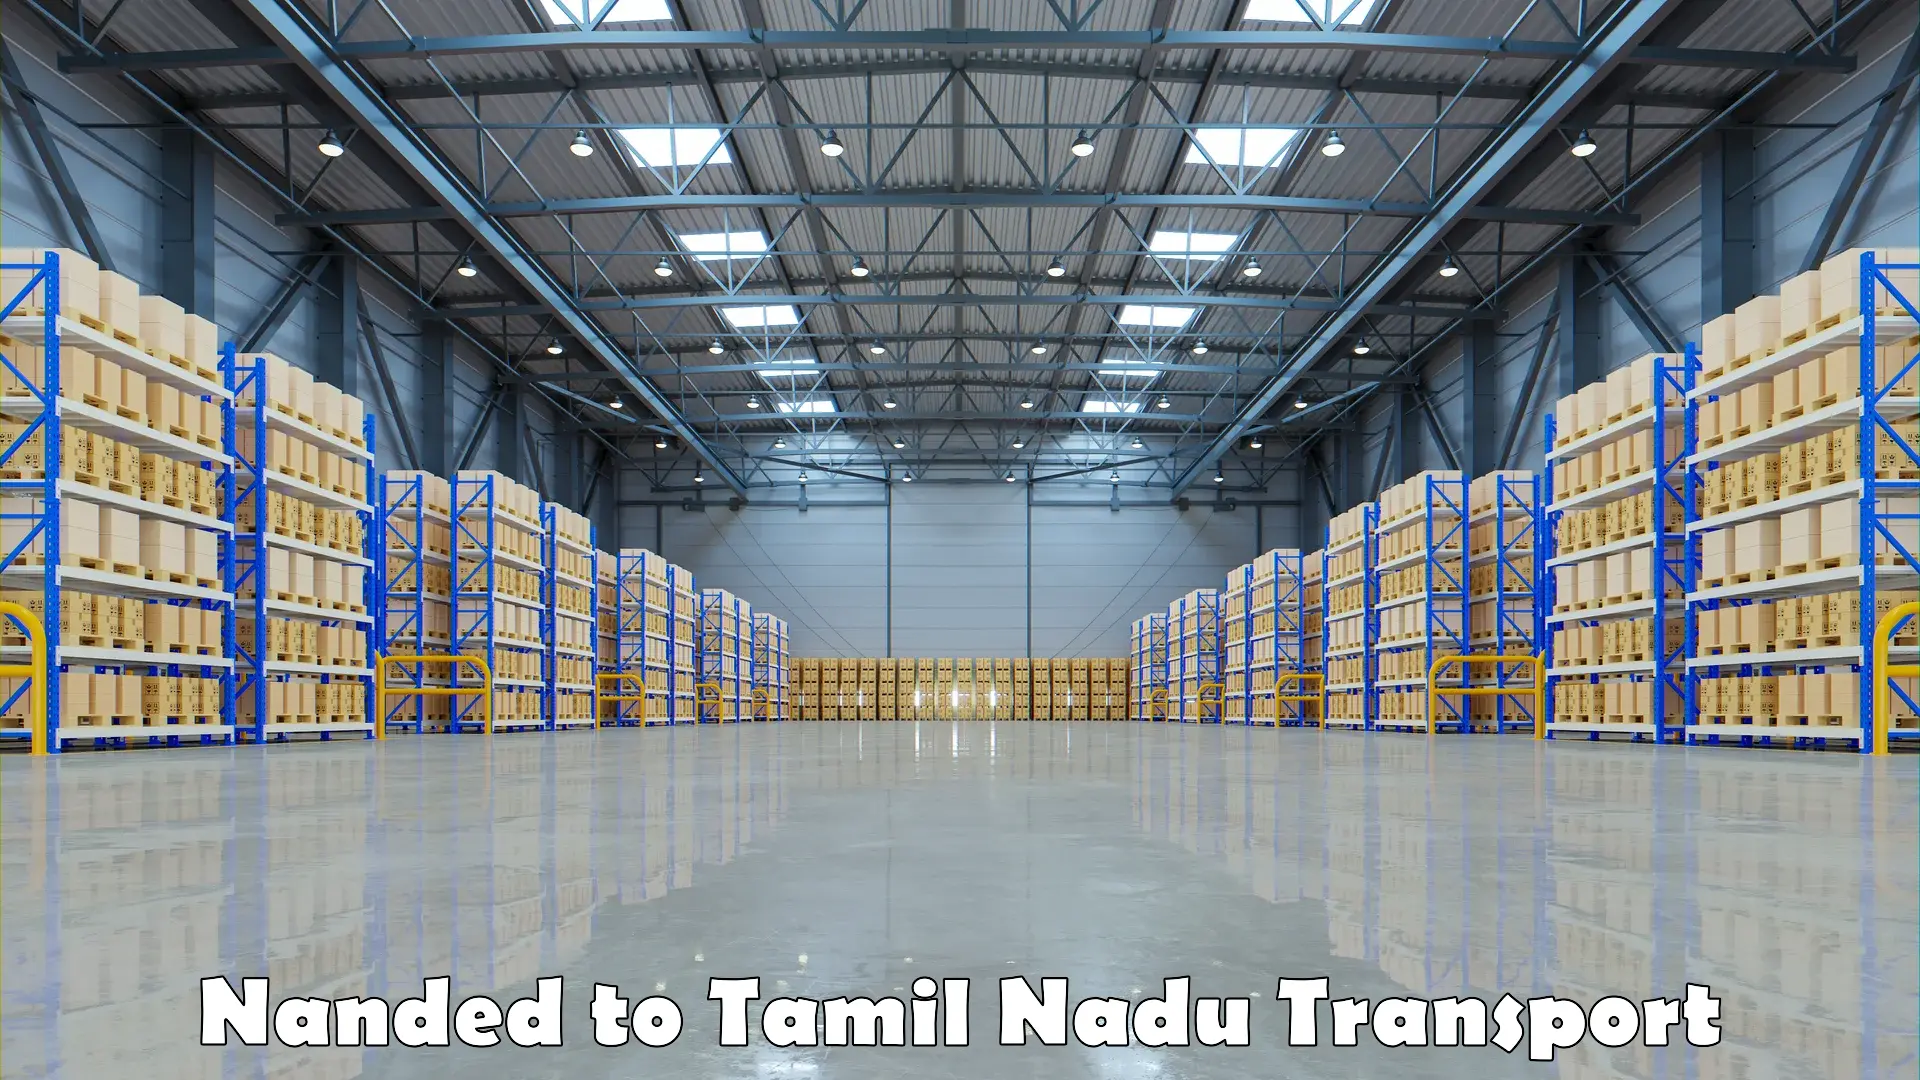 Express transport services Nanded to Chengalpattu